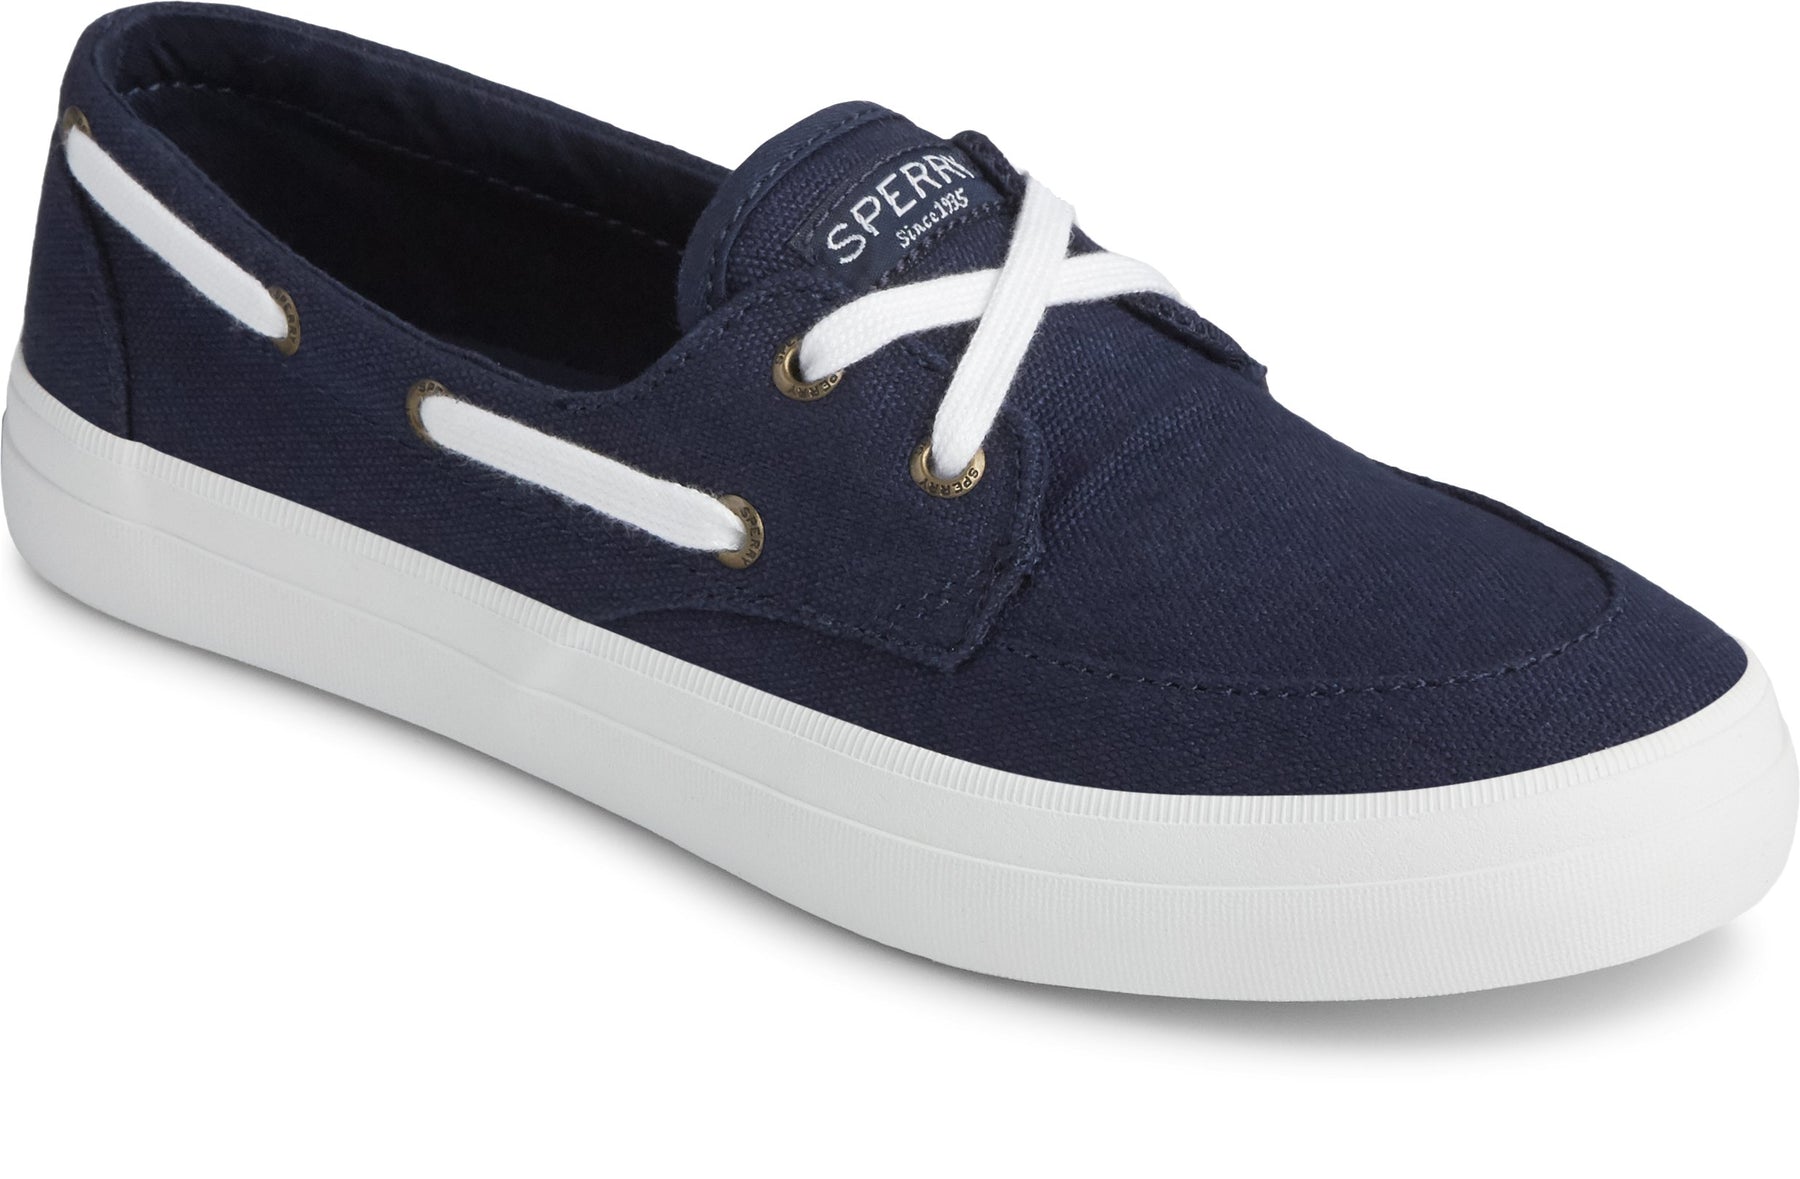 Women's Crest Boat Navy STS832060